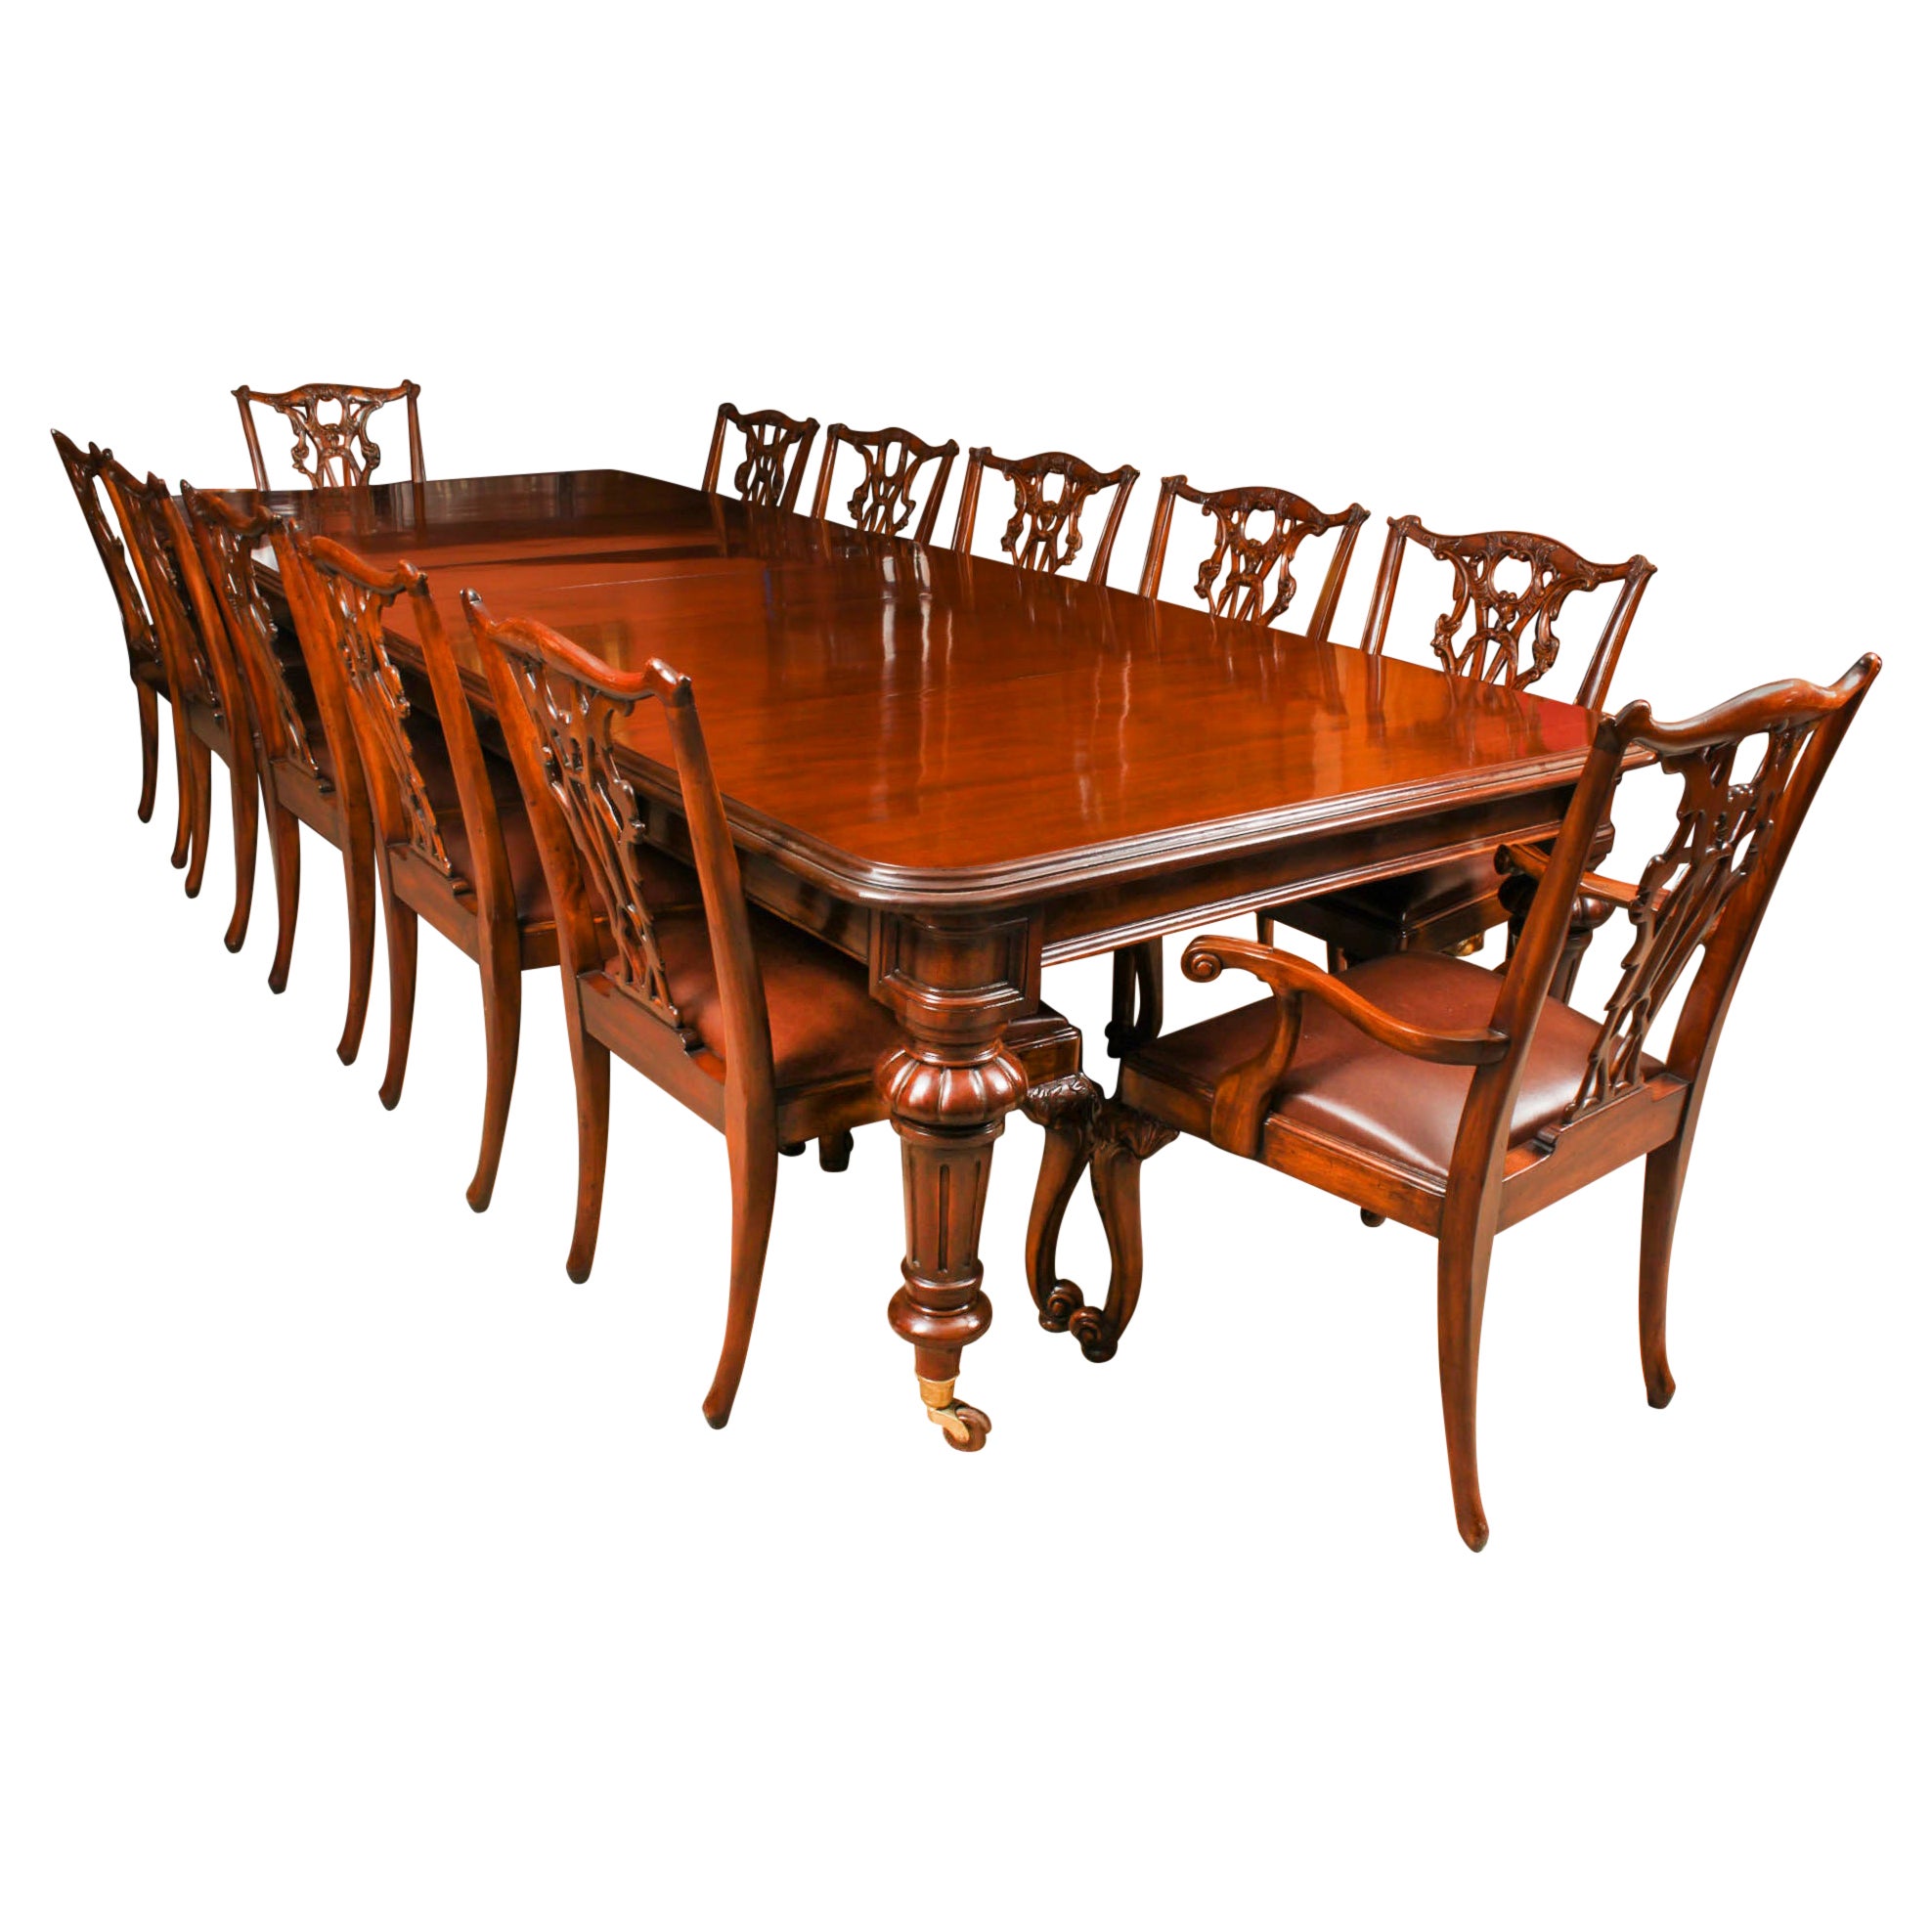 Antique 19th C 12ft Flame Mahogany Extending Dining Table & 12 chairs